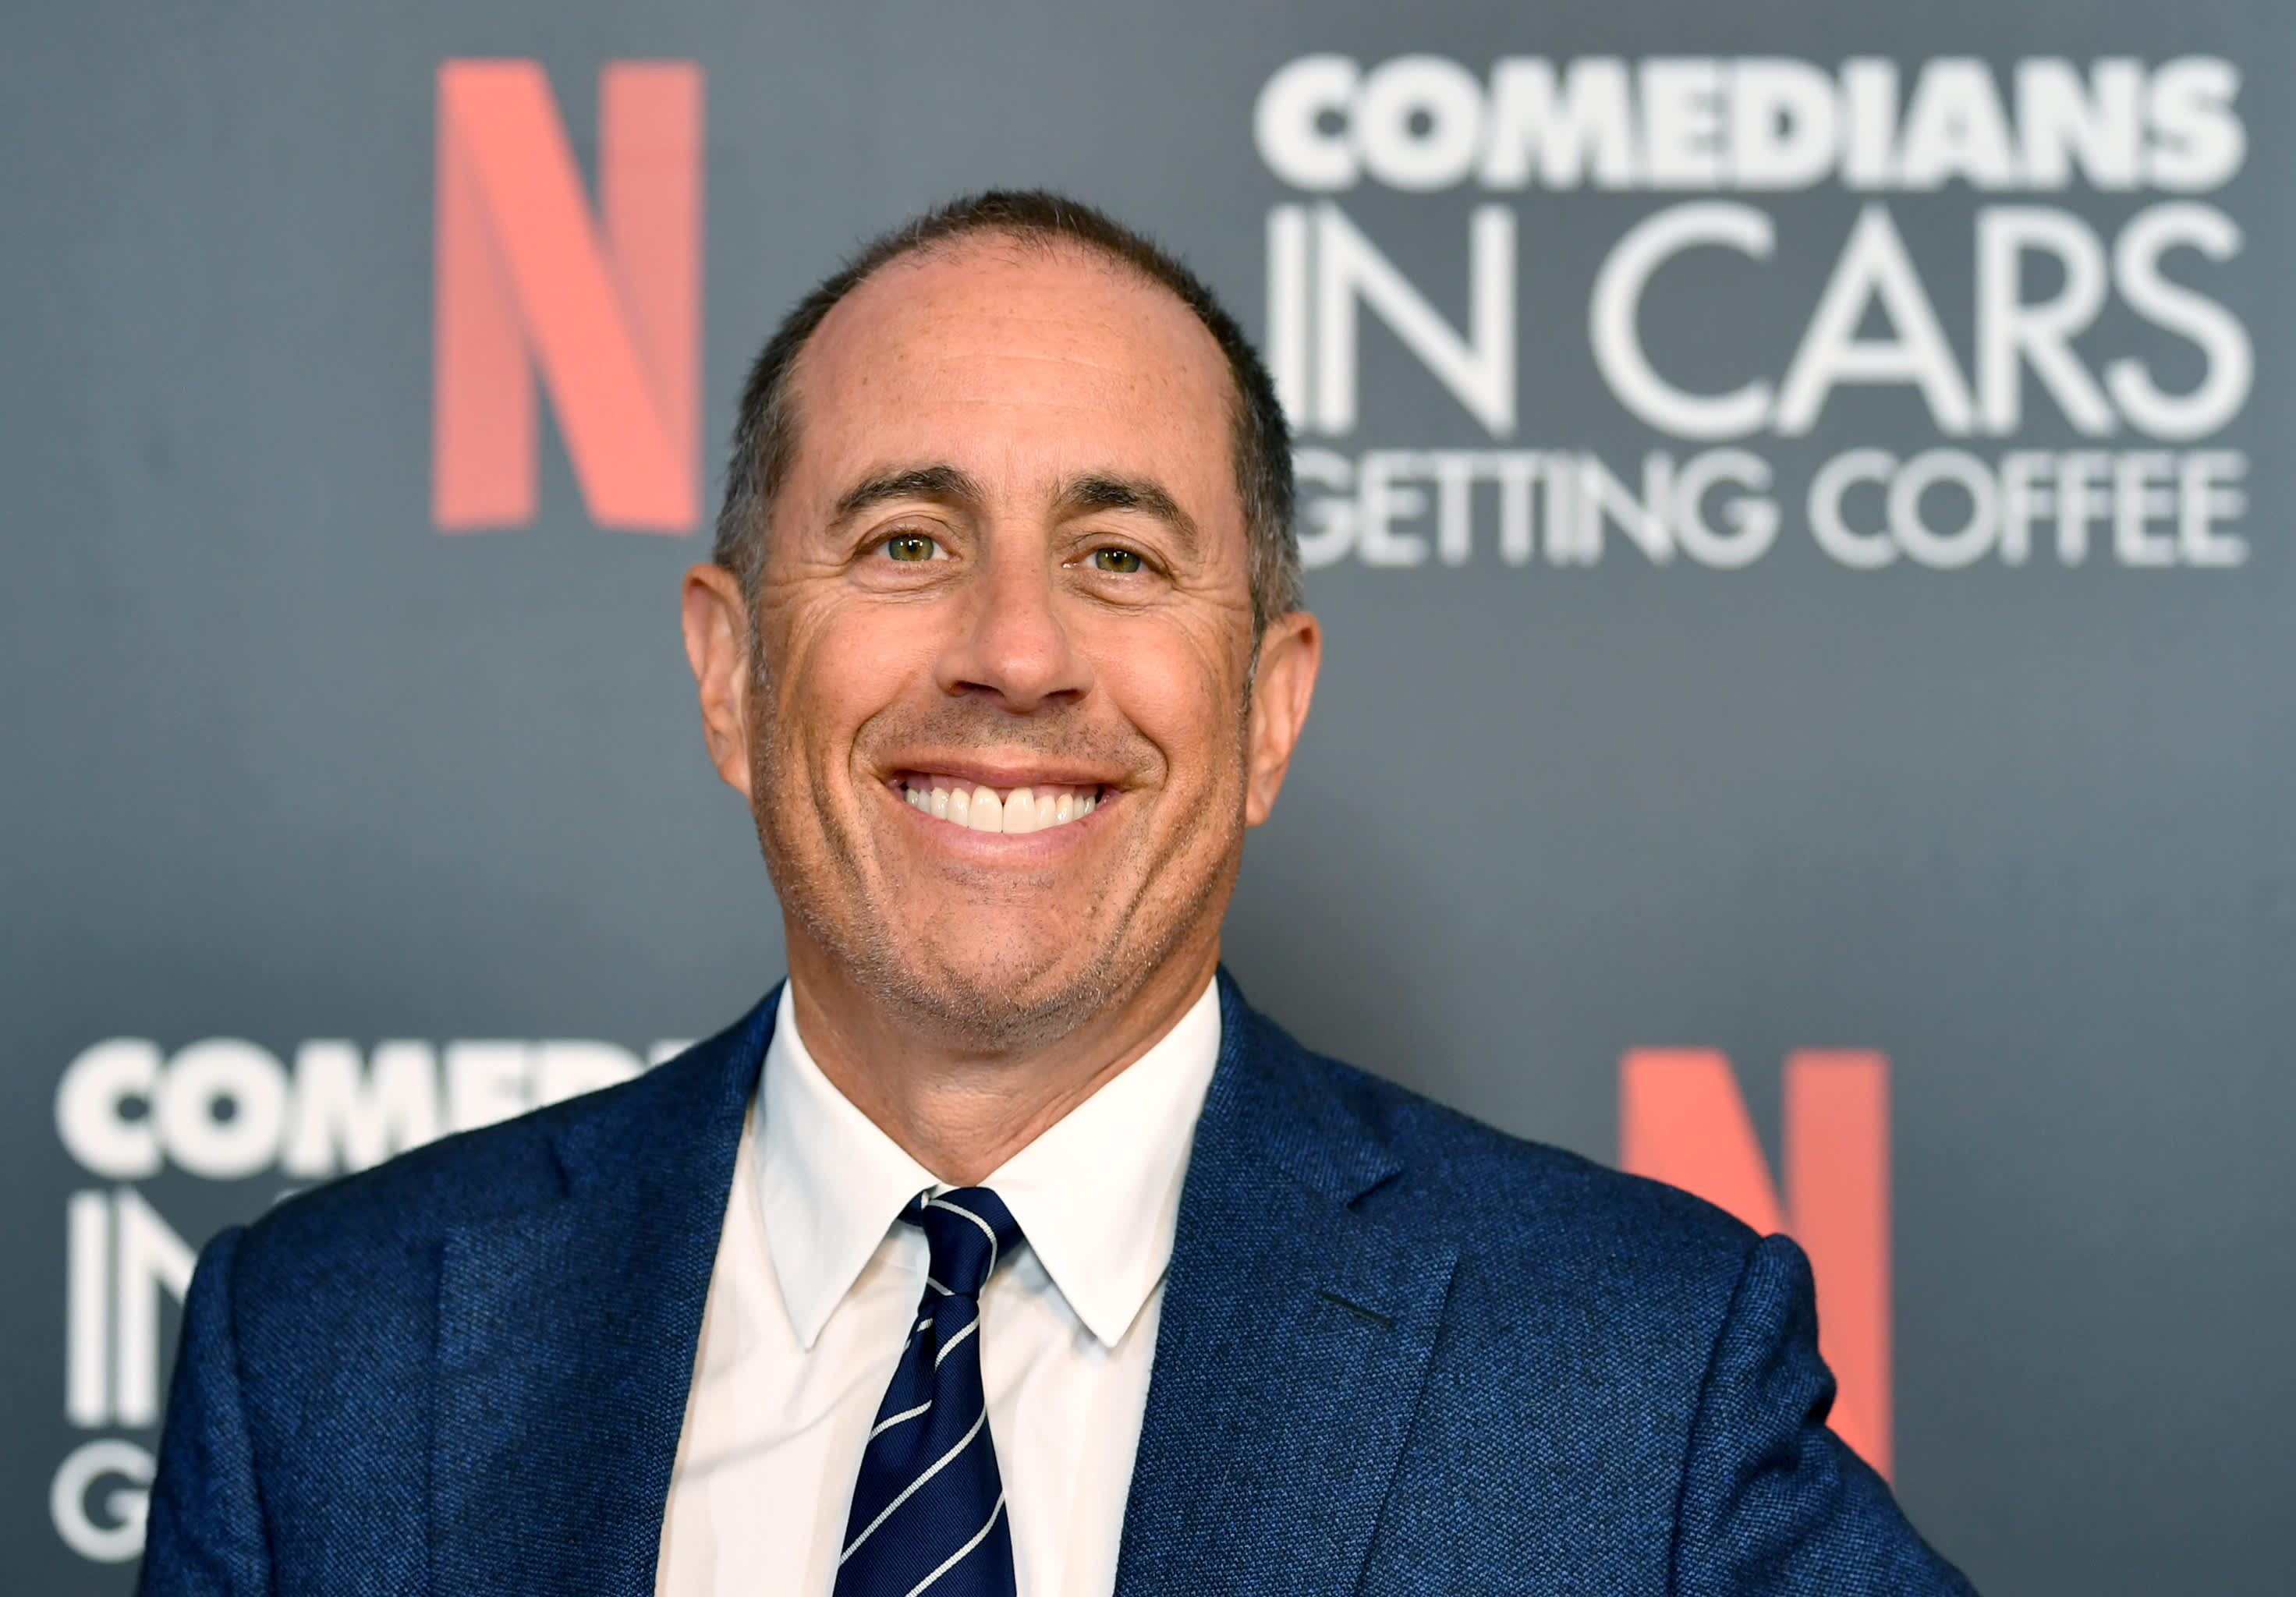 Jerry Seinfeld: Success and productivity tips on Tim Ferriss podcast